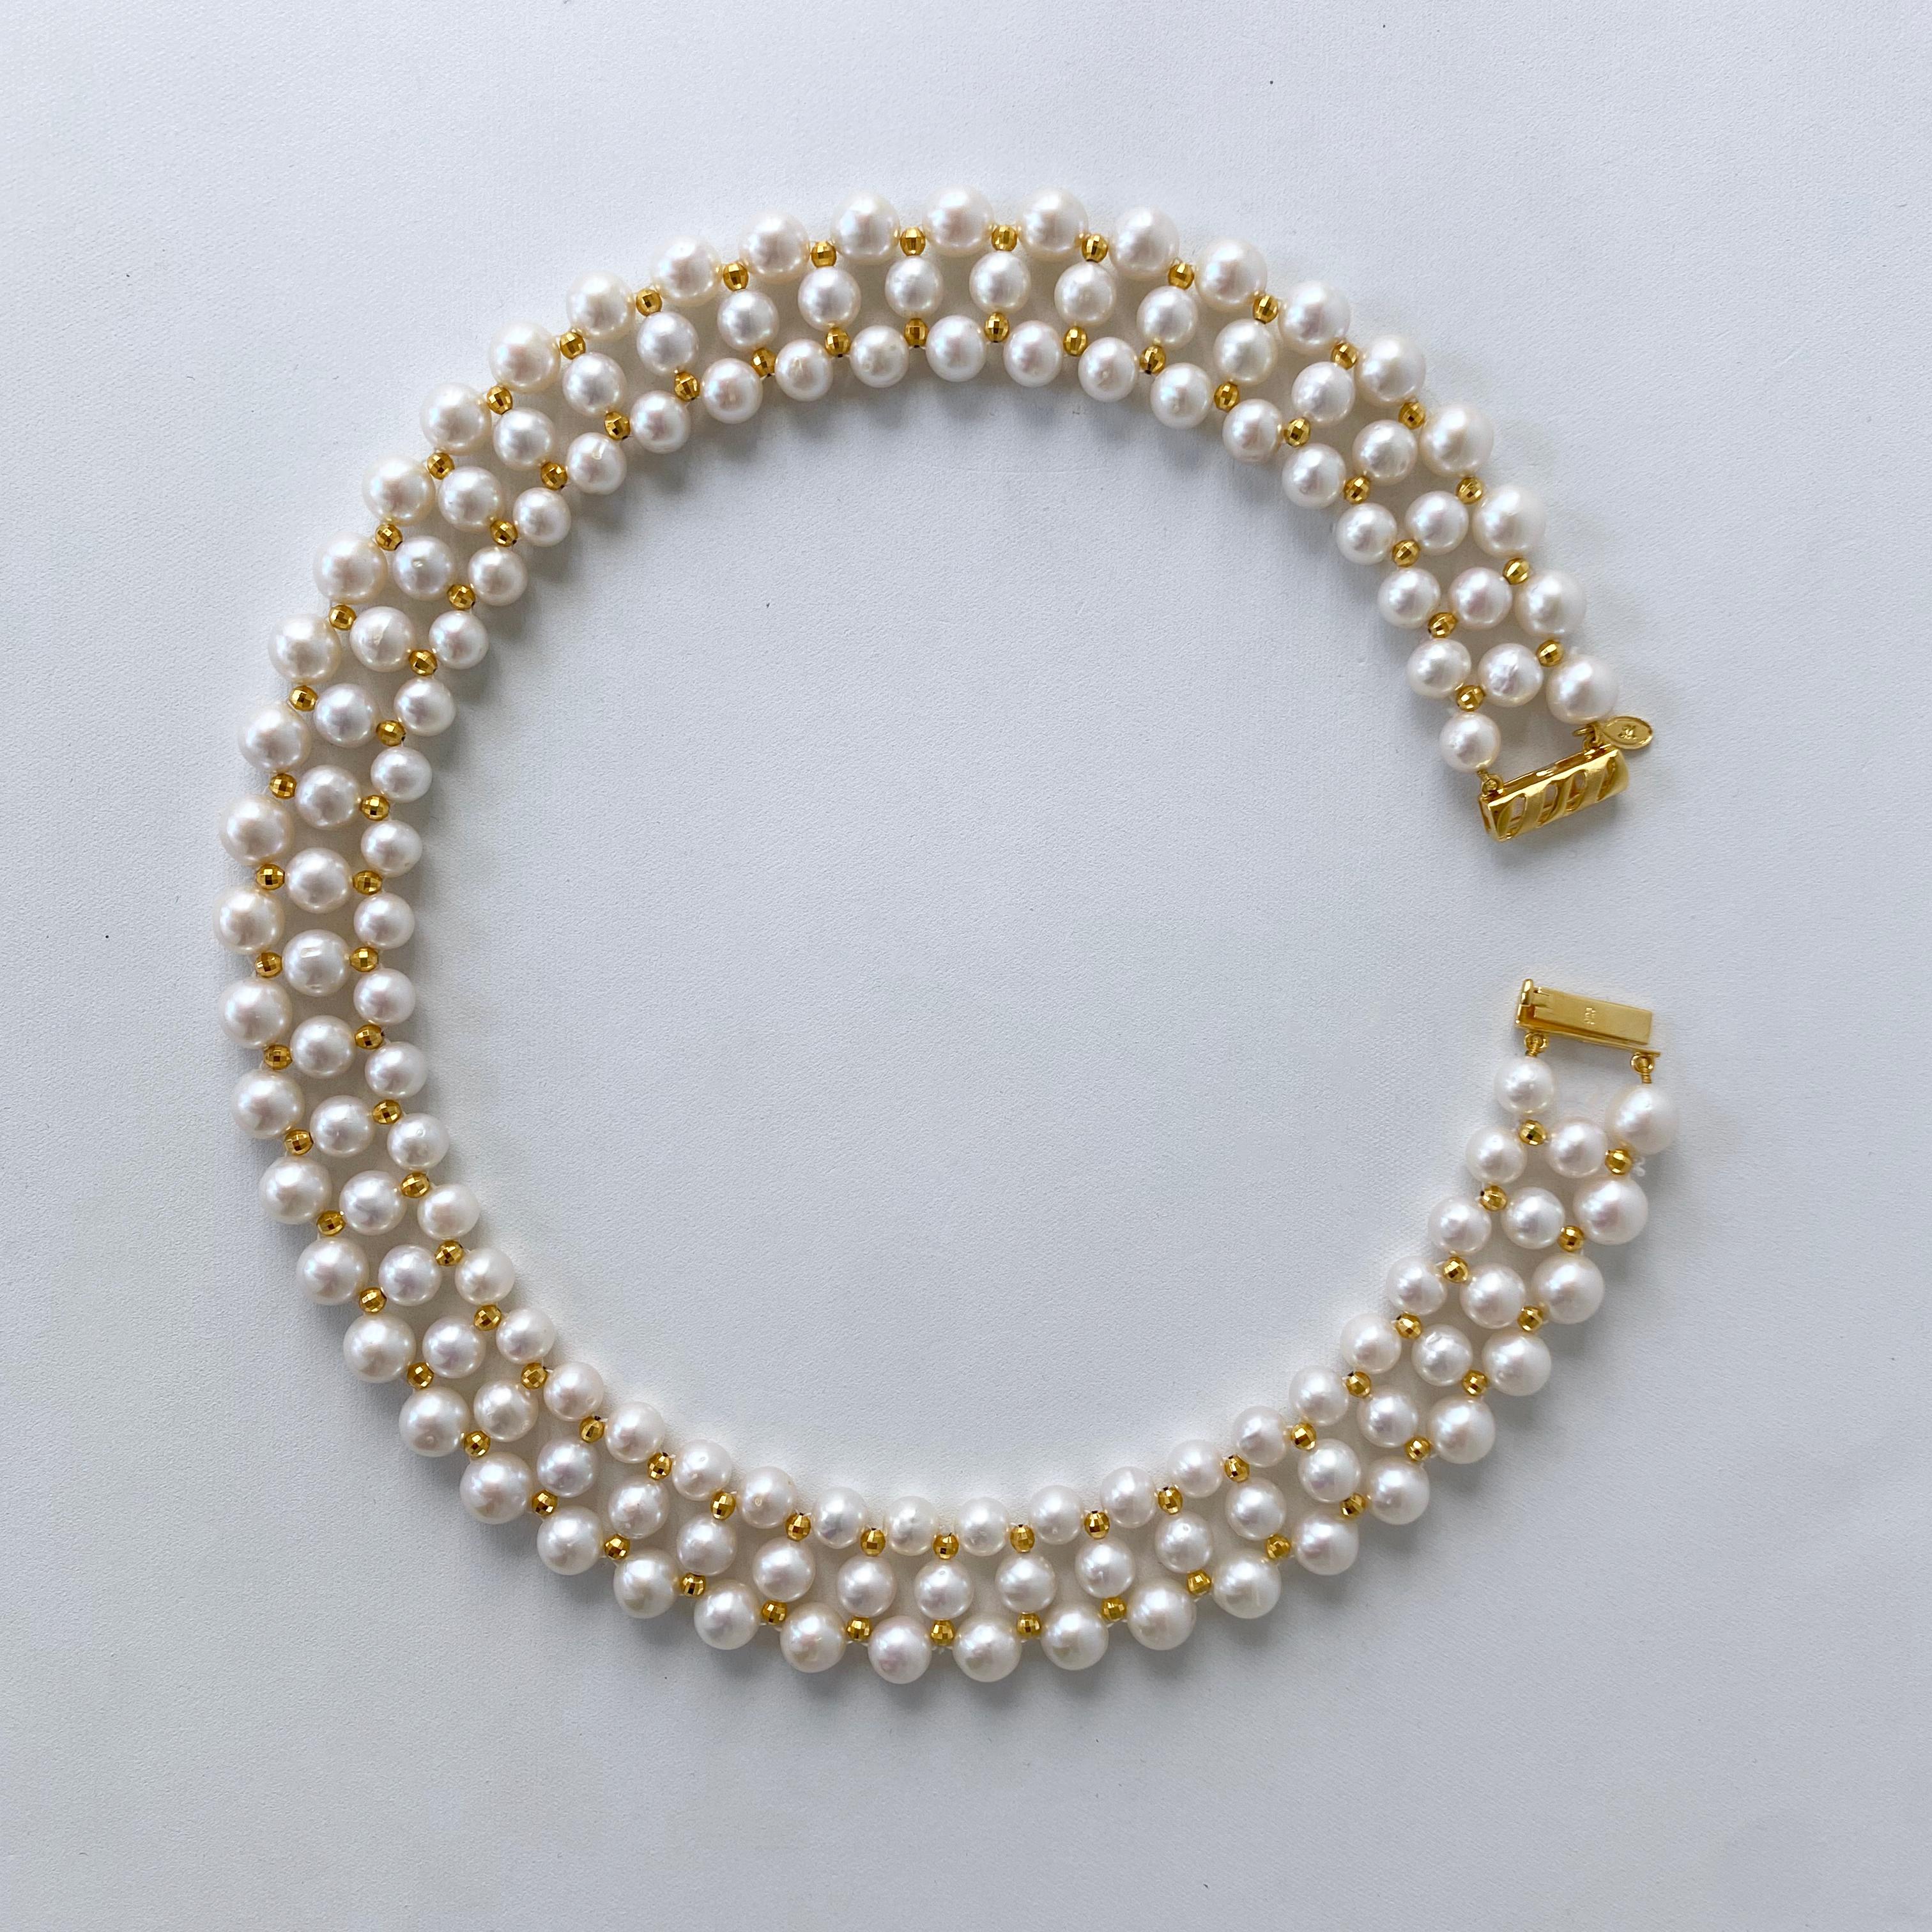 Women's Marina J. Pearl Woven Necklace with 14k Yellow Gold Faceted Findings & Clasp For Sale